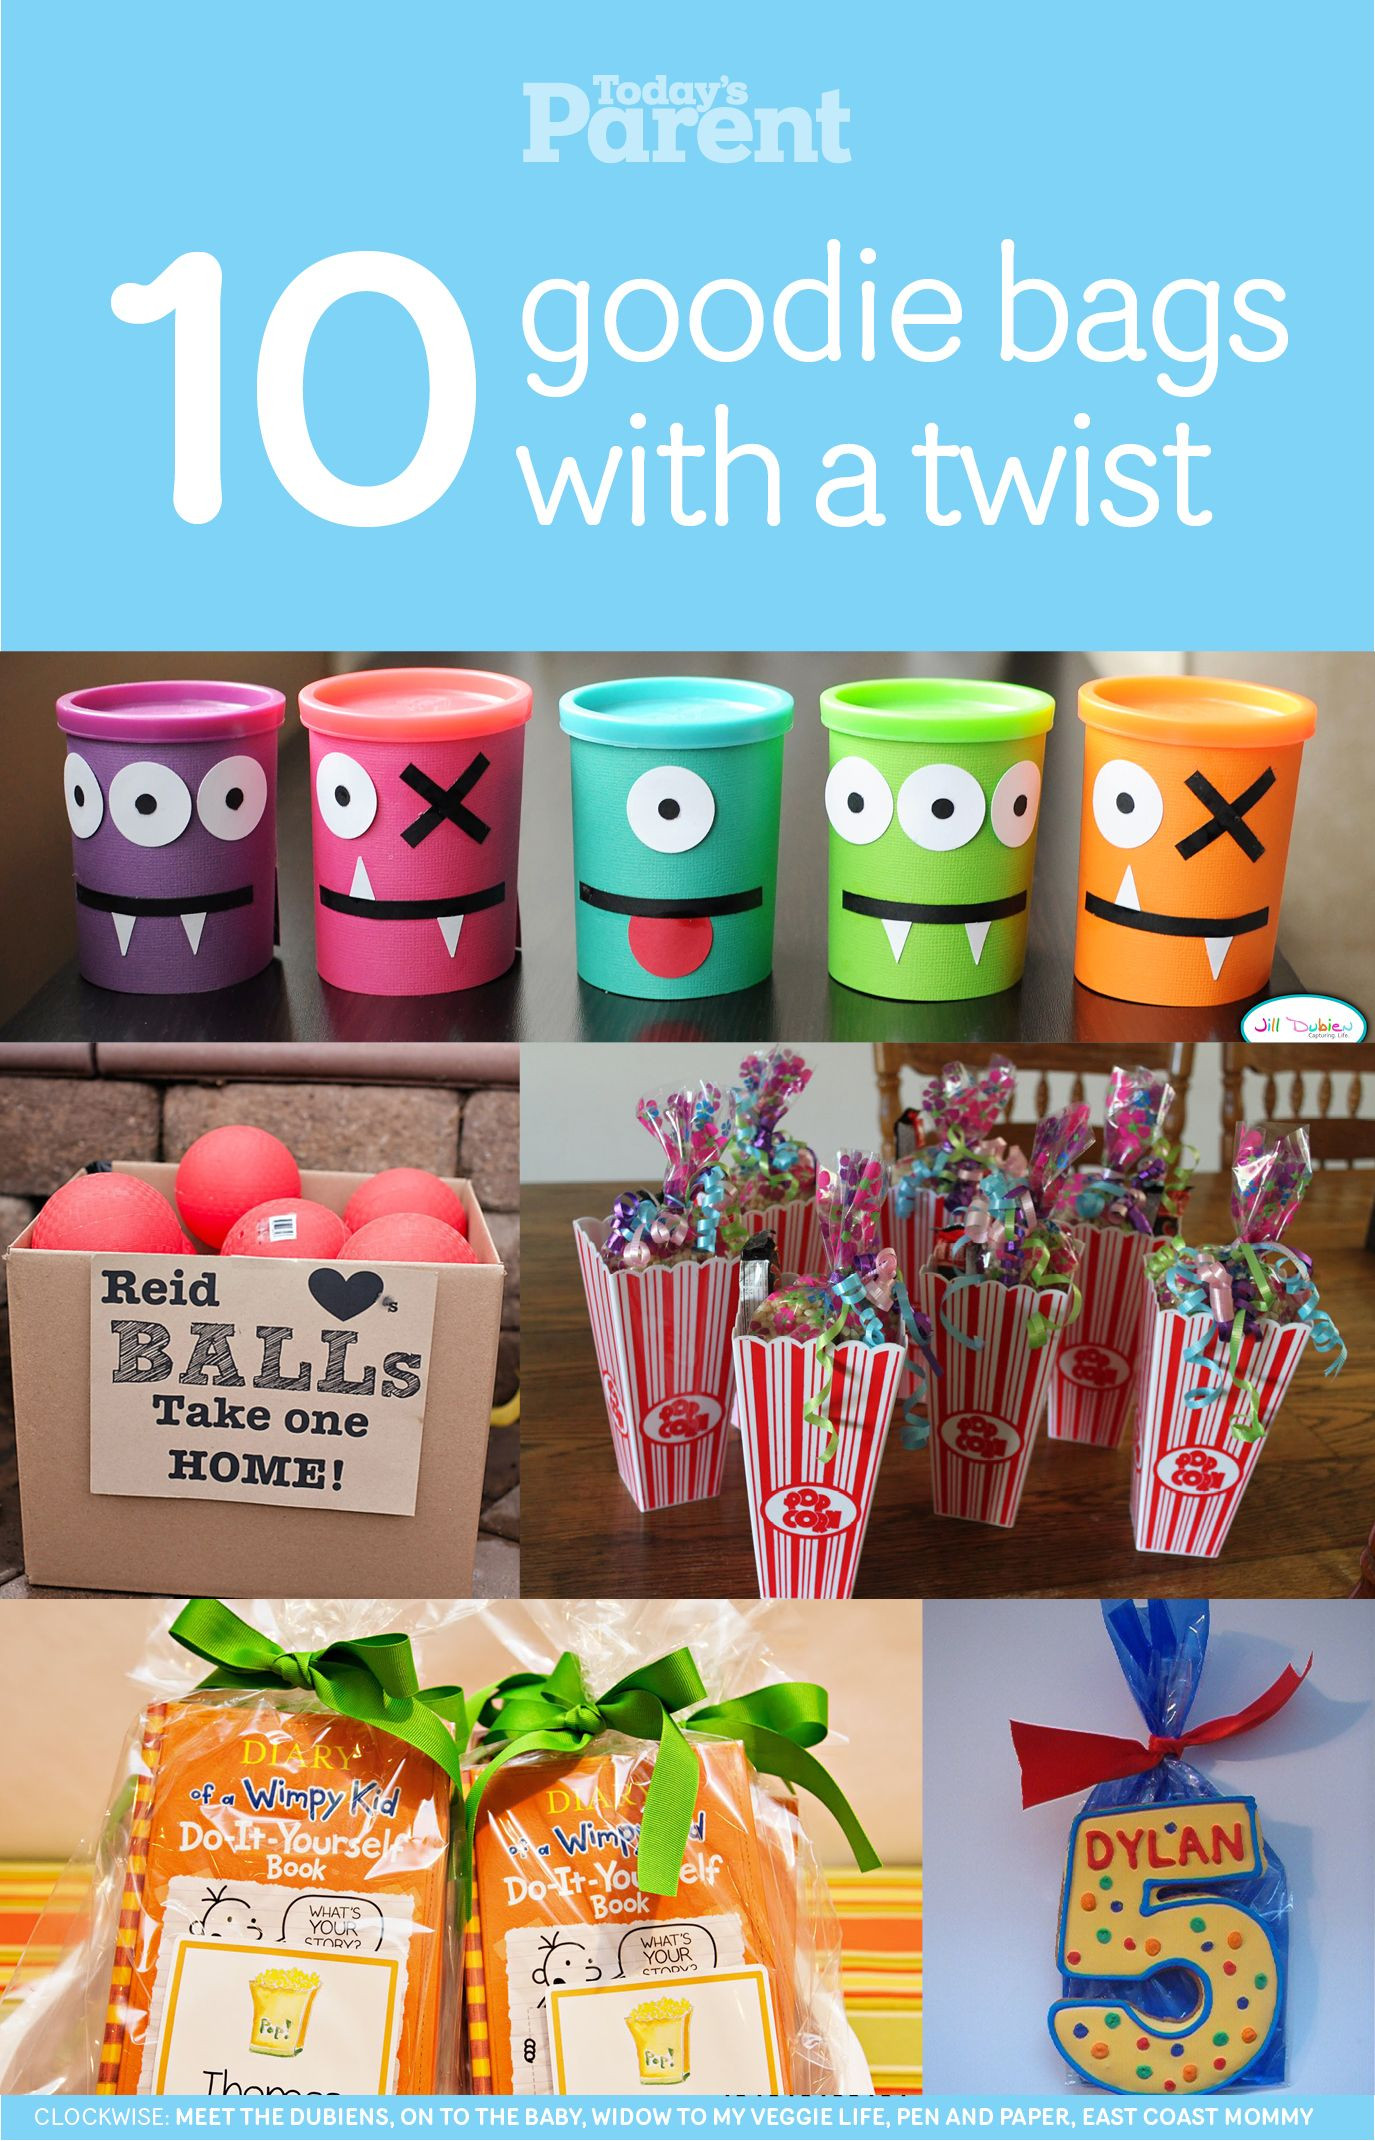 Halloween Party Ideas For 10 Year Olds
 14 goo bags with a twist